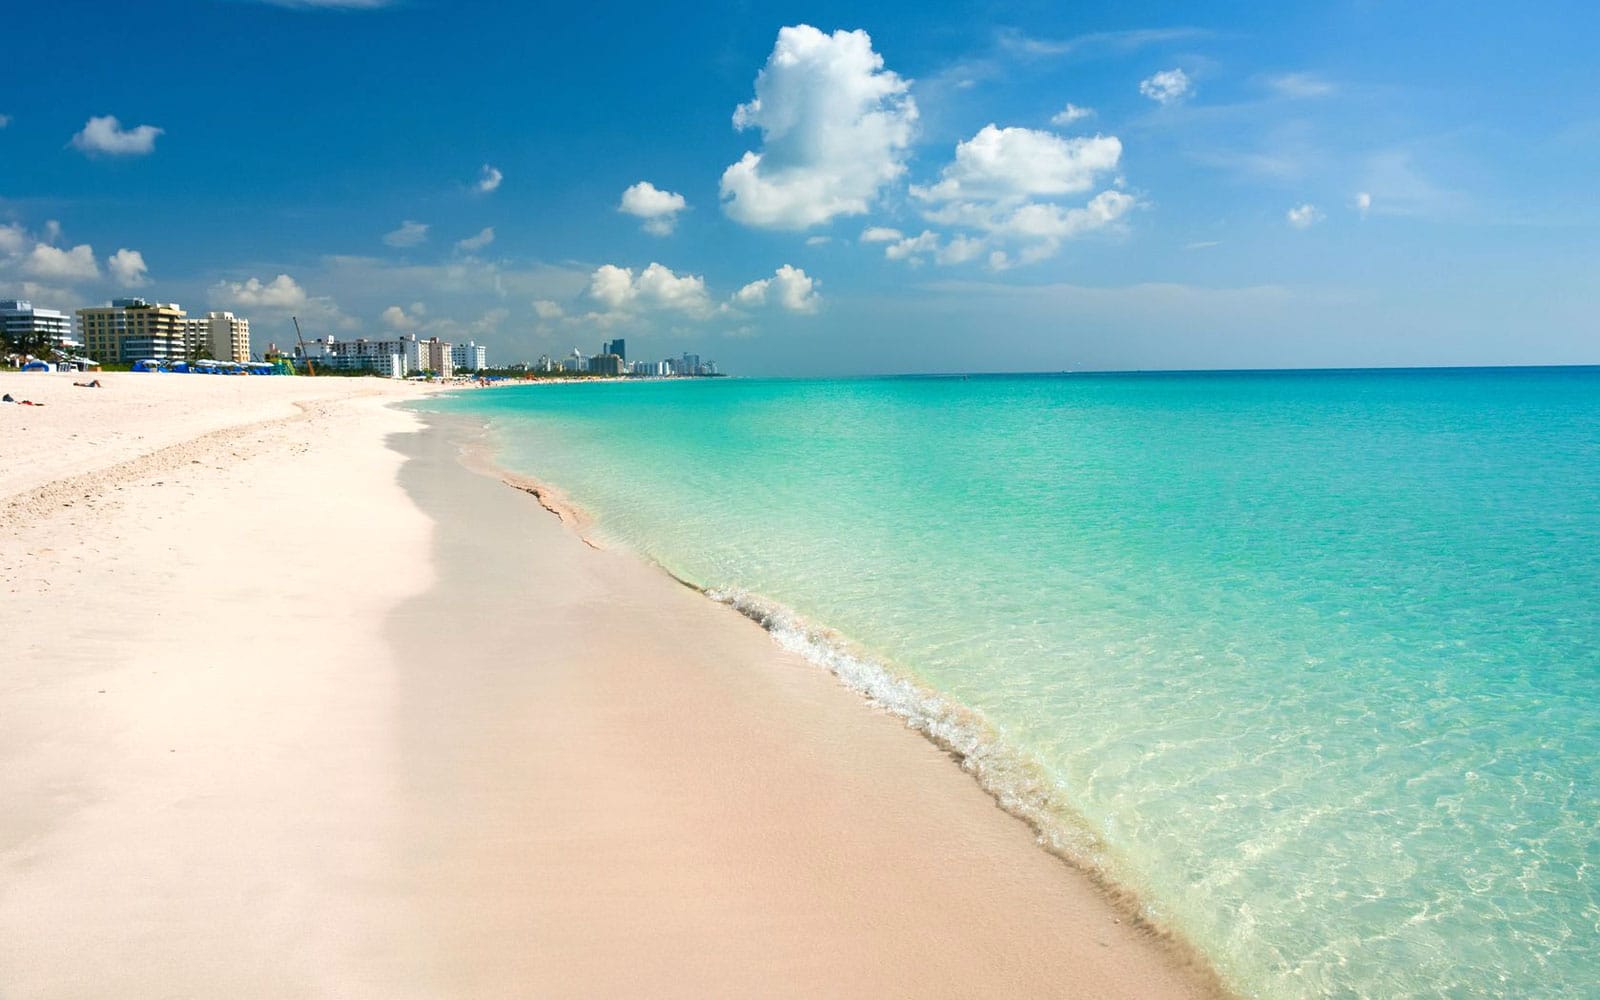 Miami beach is the most visited beach destination in the world